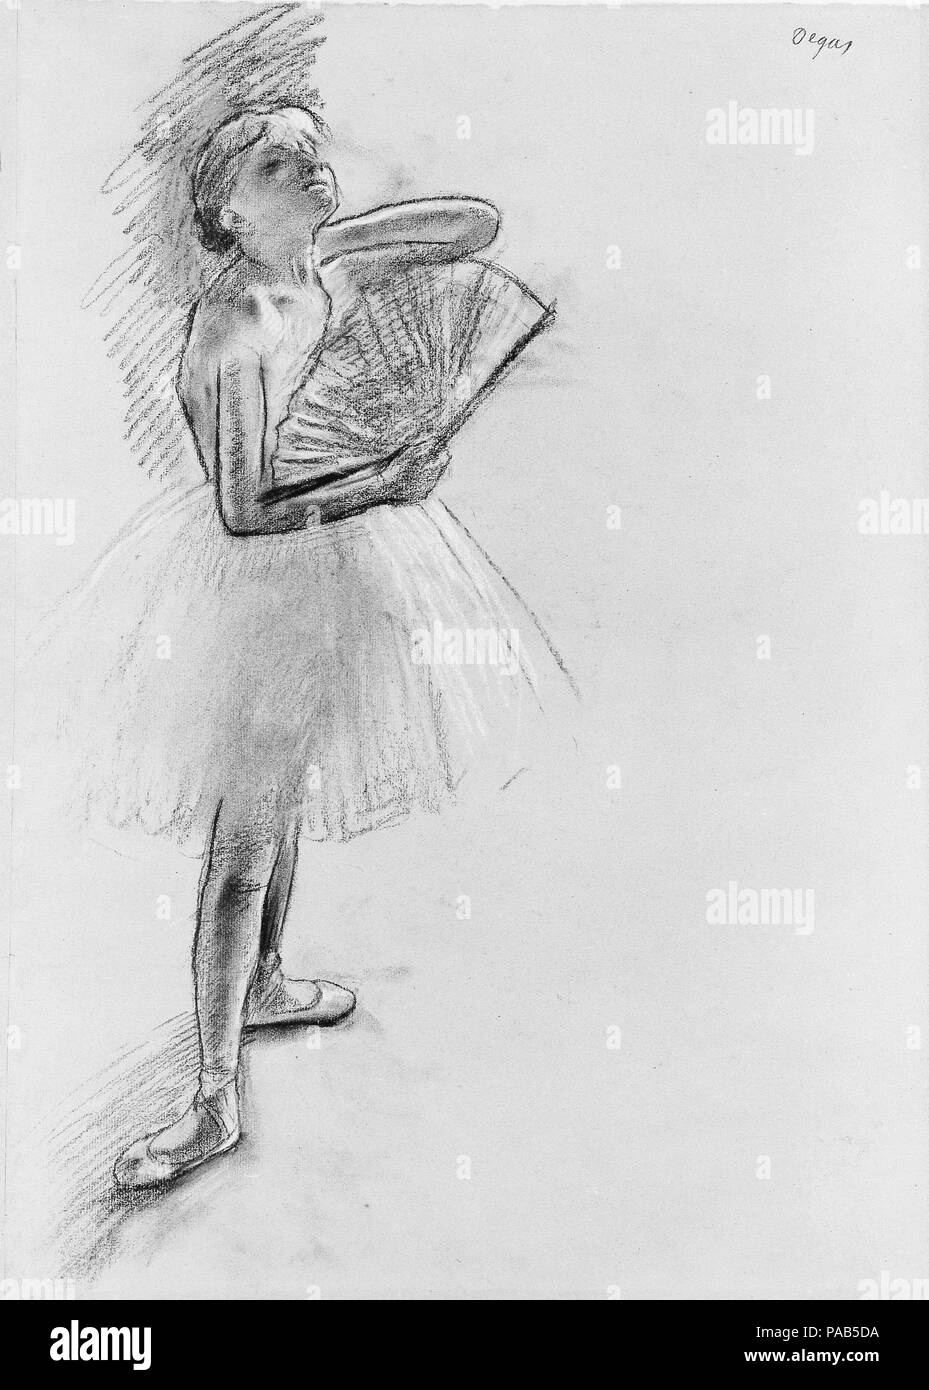 Dancer with a Fan. Artist: Edgar Degas (French, Paris 1834-1917 Paris).  Dimensions: 24 x 16 1/2 in. (61 x 41.9 cm). Date: ca. 1880. This study is  for the central figure in